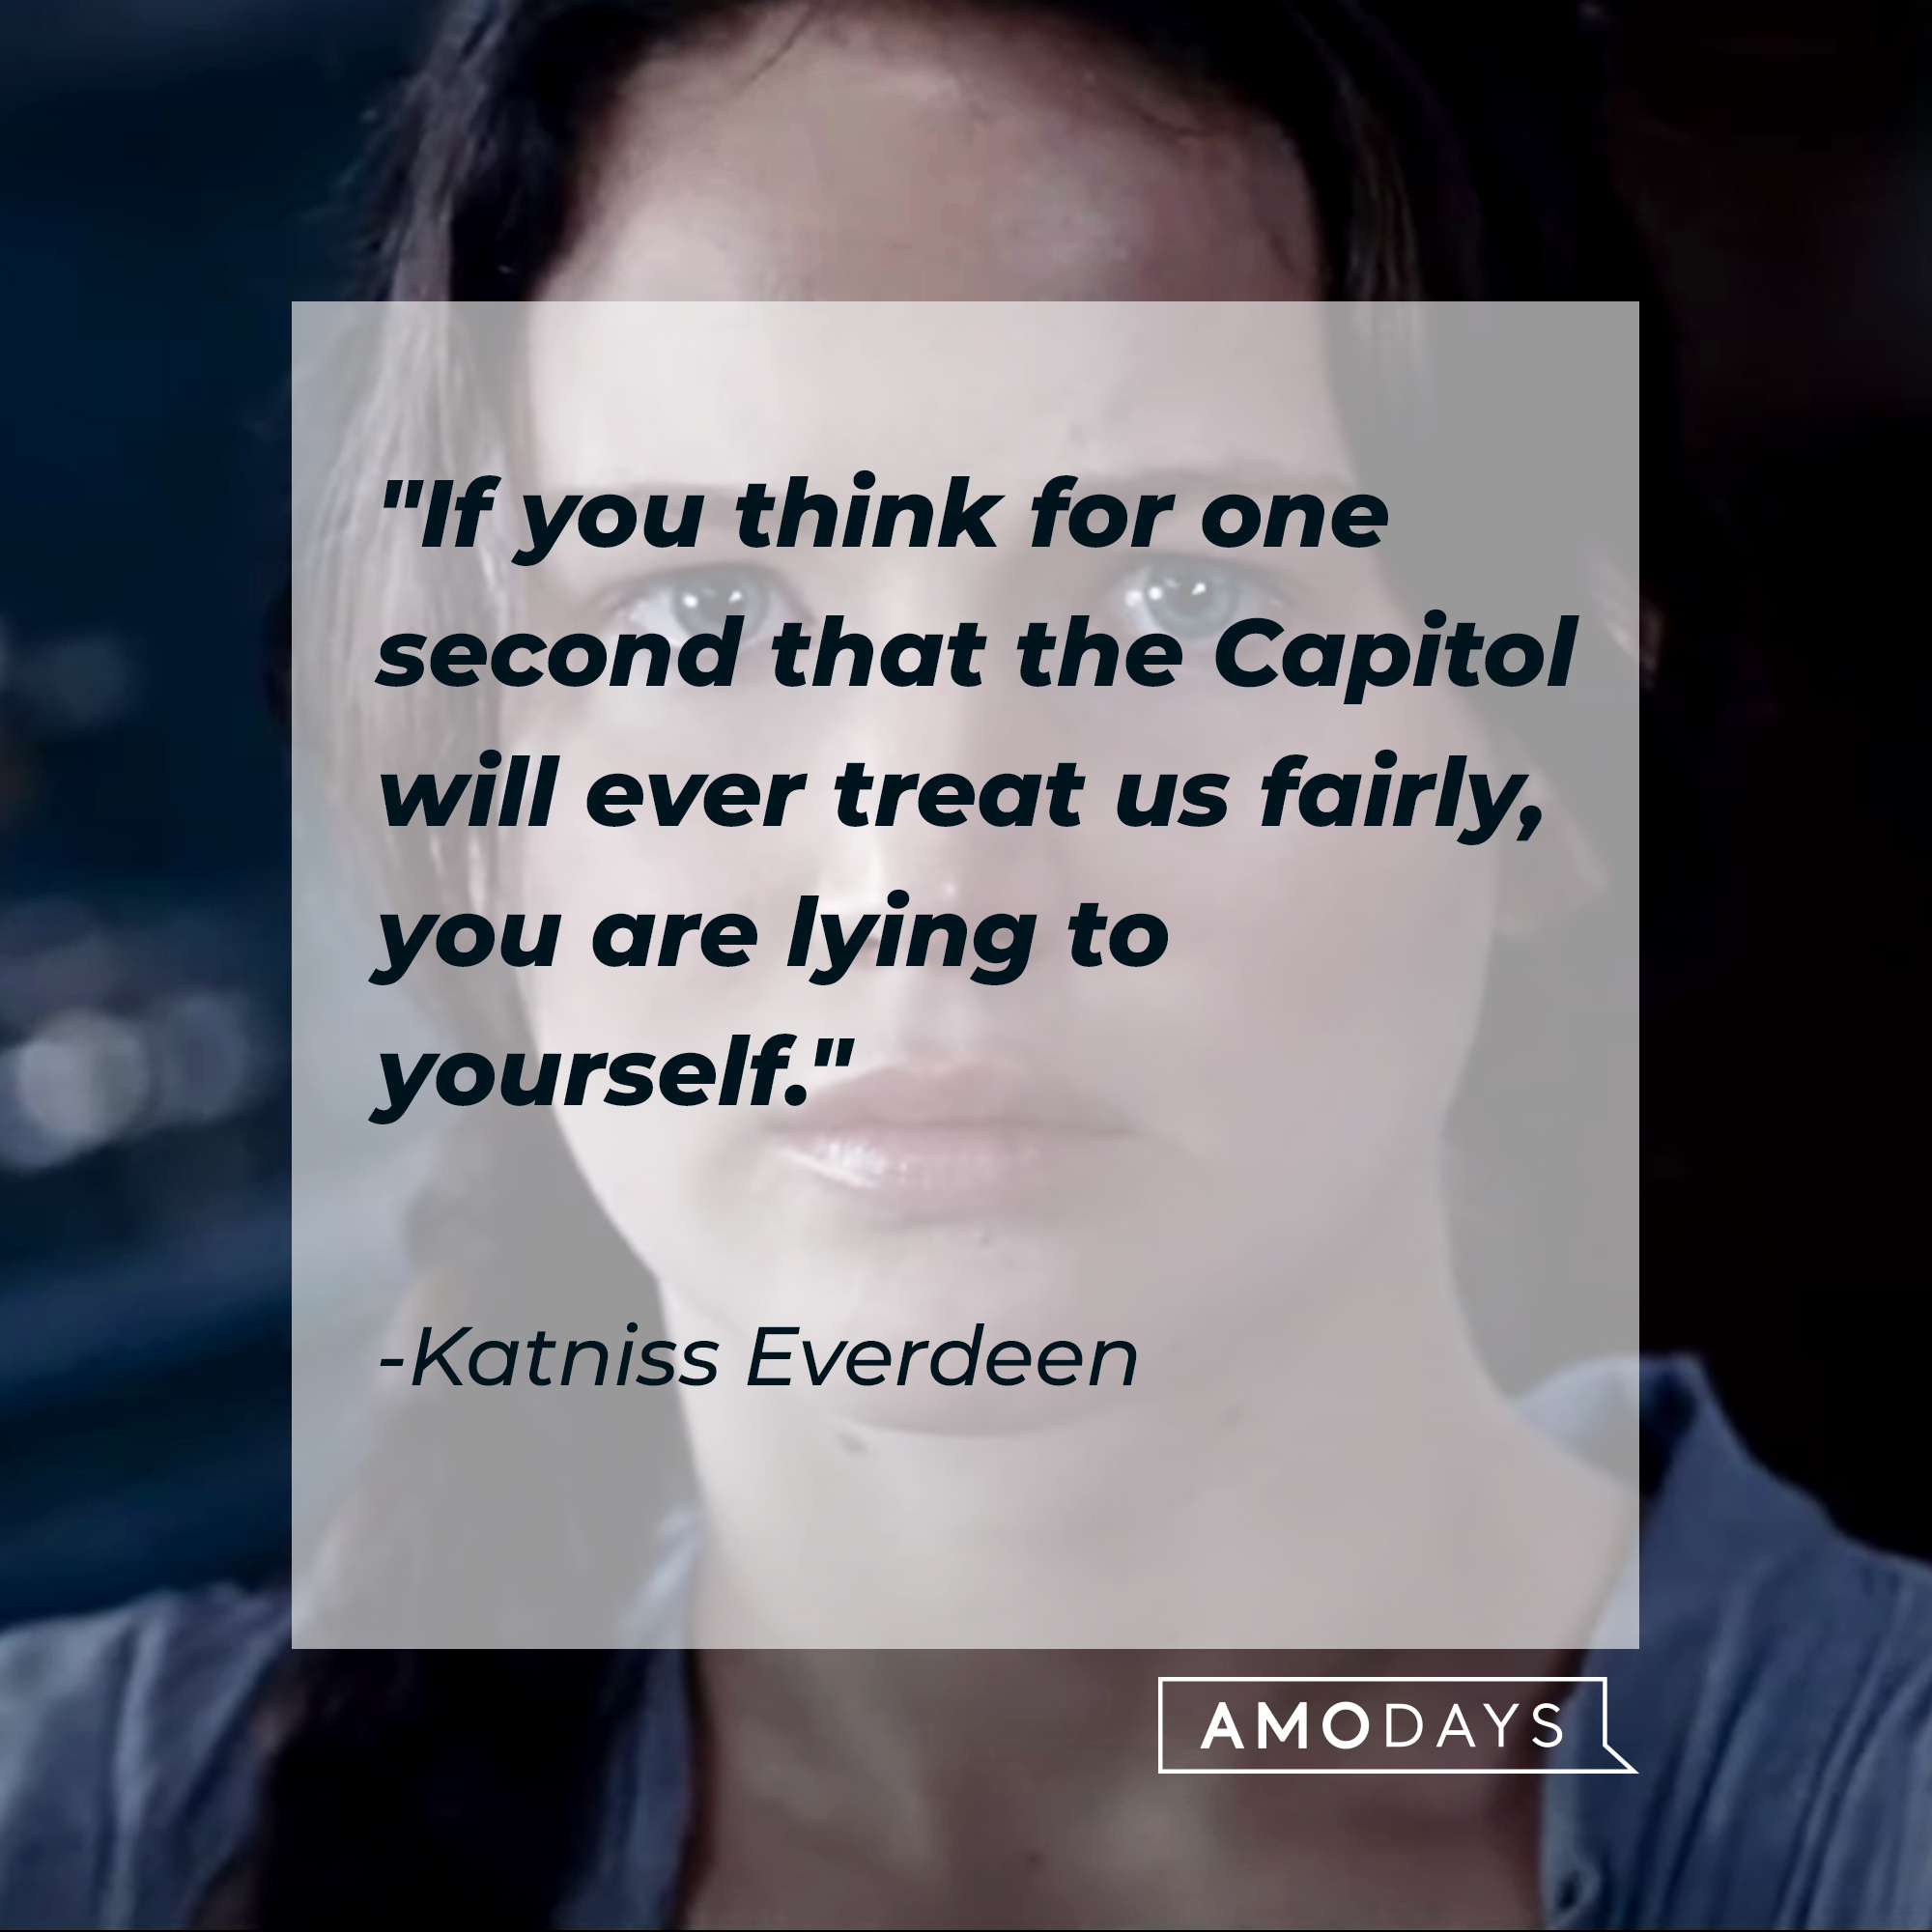 Katniss Everdeen, with her quote: "If you think for one second that the Capitol will ever treat us fairly, you are lying to yourself“ | Source: Youtube.com/TheHungerGamesMovies